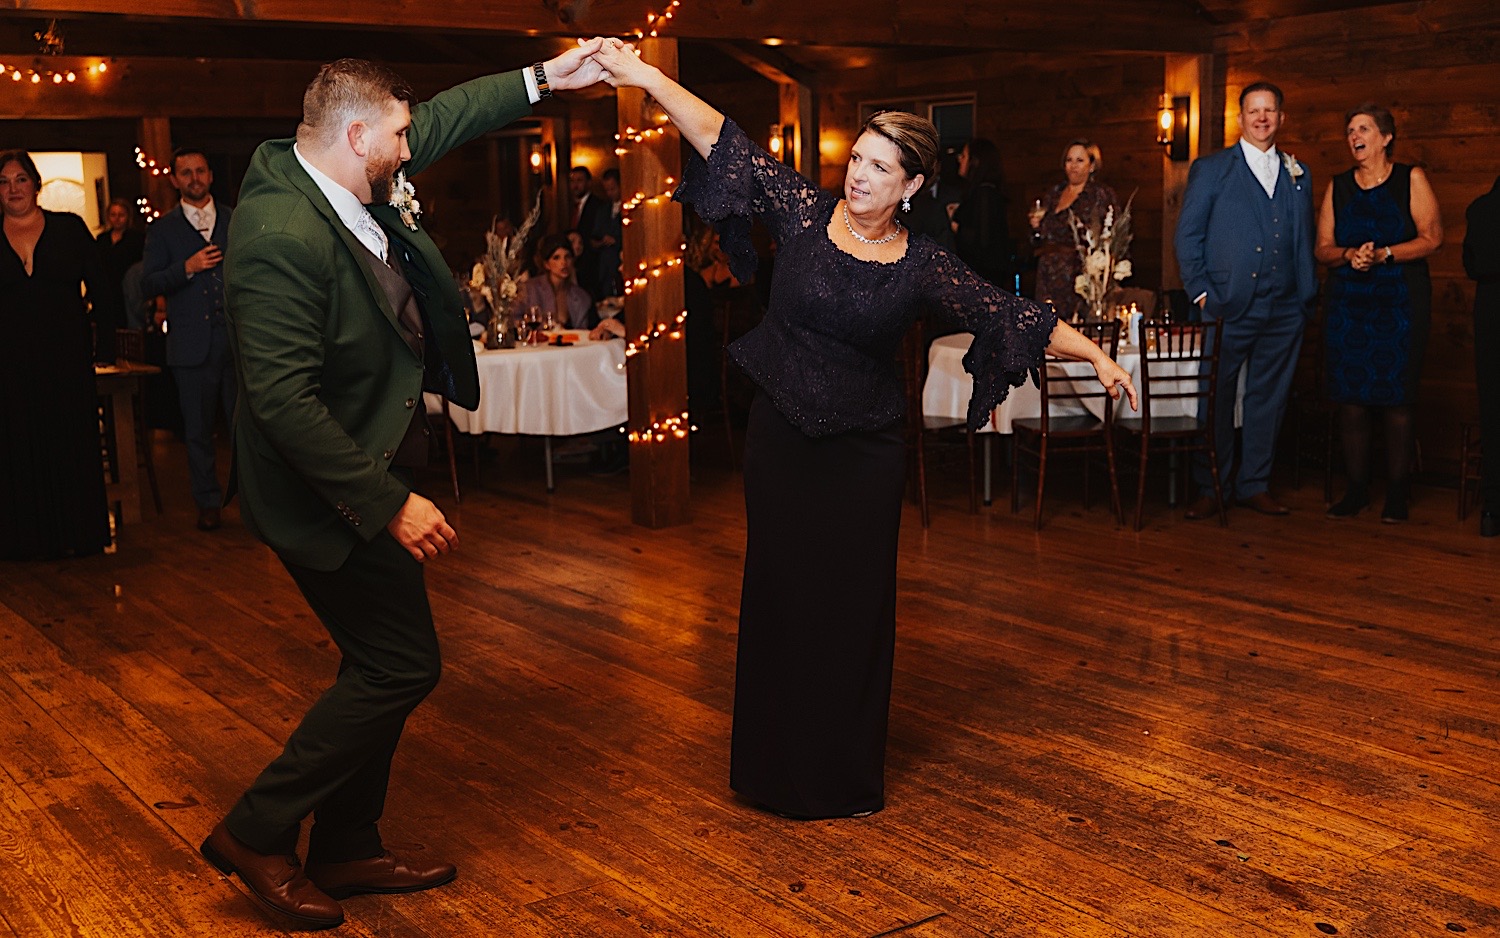 A groom and his mother share their first dance together as guests watch during an indoor wedding reception at Lake Bomoseen Lodge in Vermont